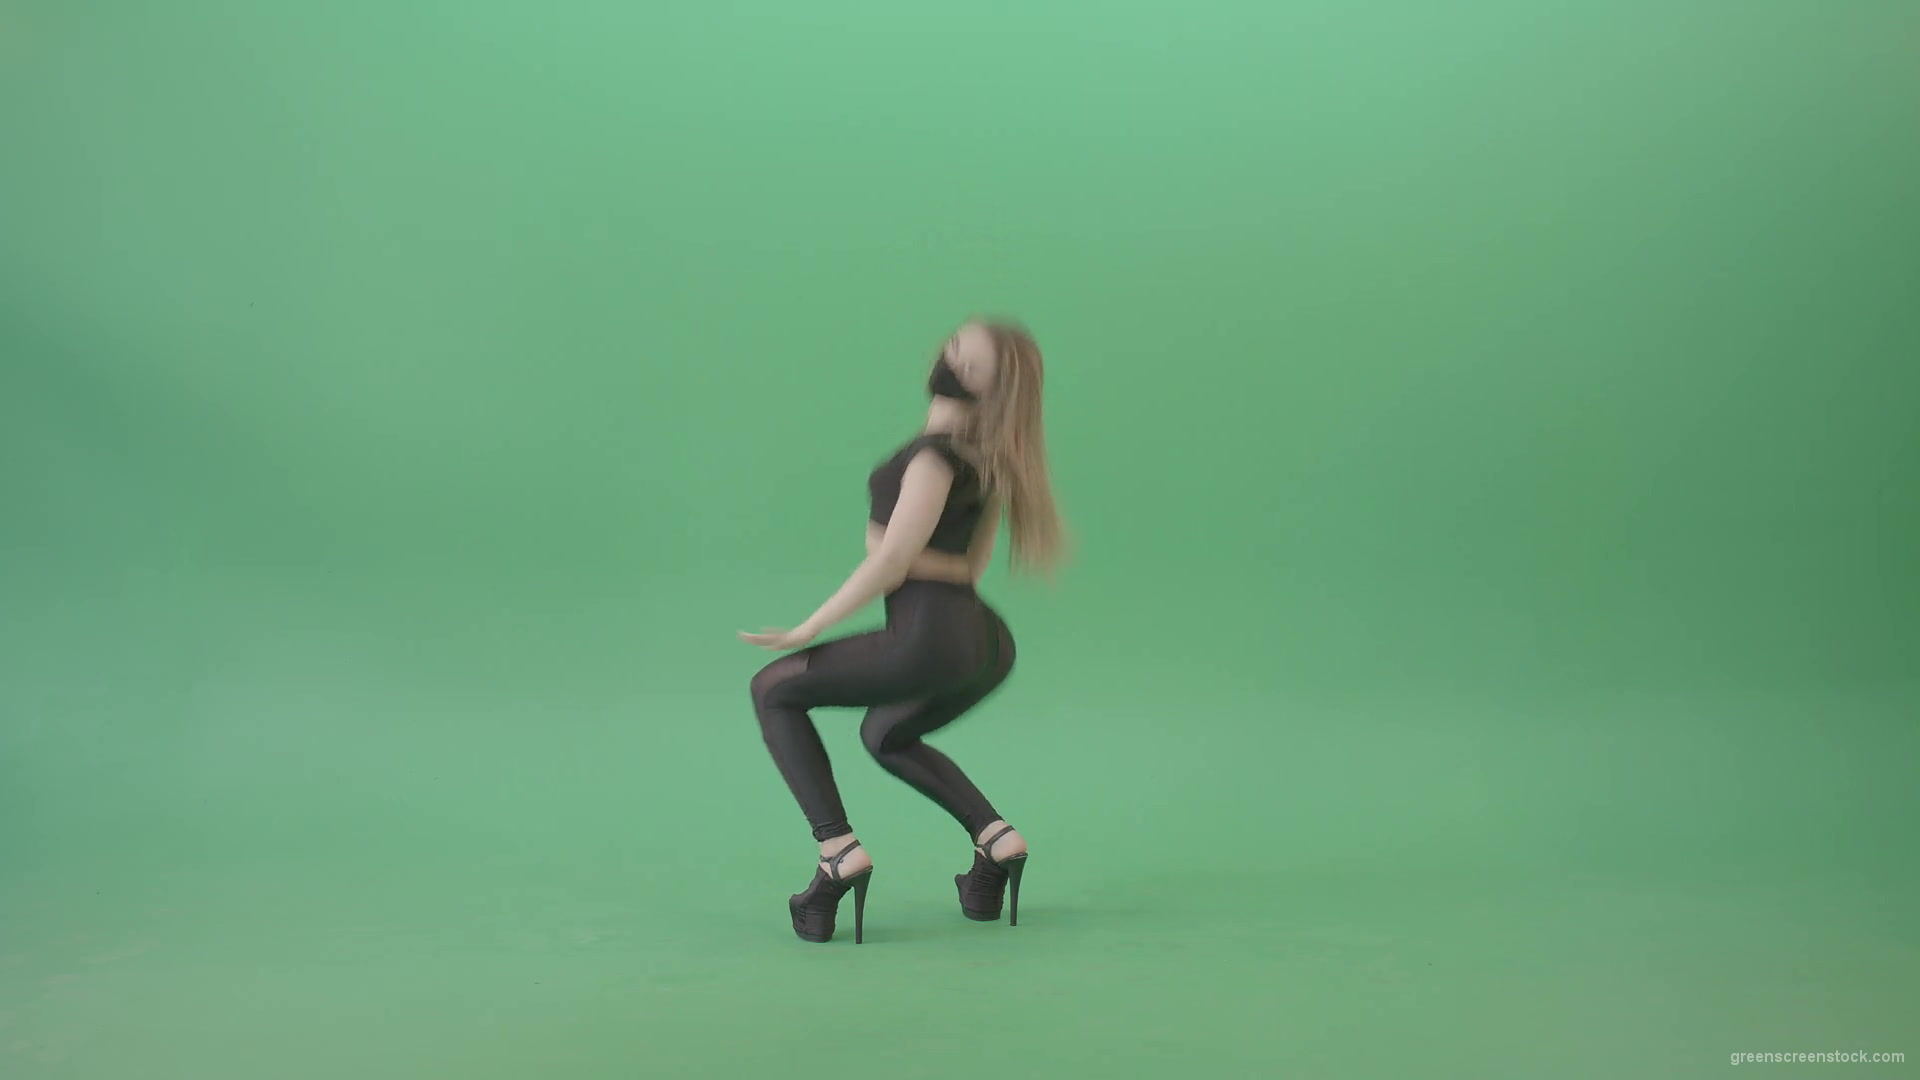 Exotic-sexy-dance-by-girl-in-black-latex-dress-isolated-on-green-screen-4K-Video-Footage-1920_007 Green Screen Stock